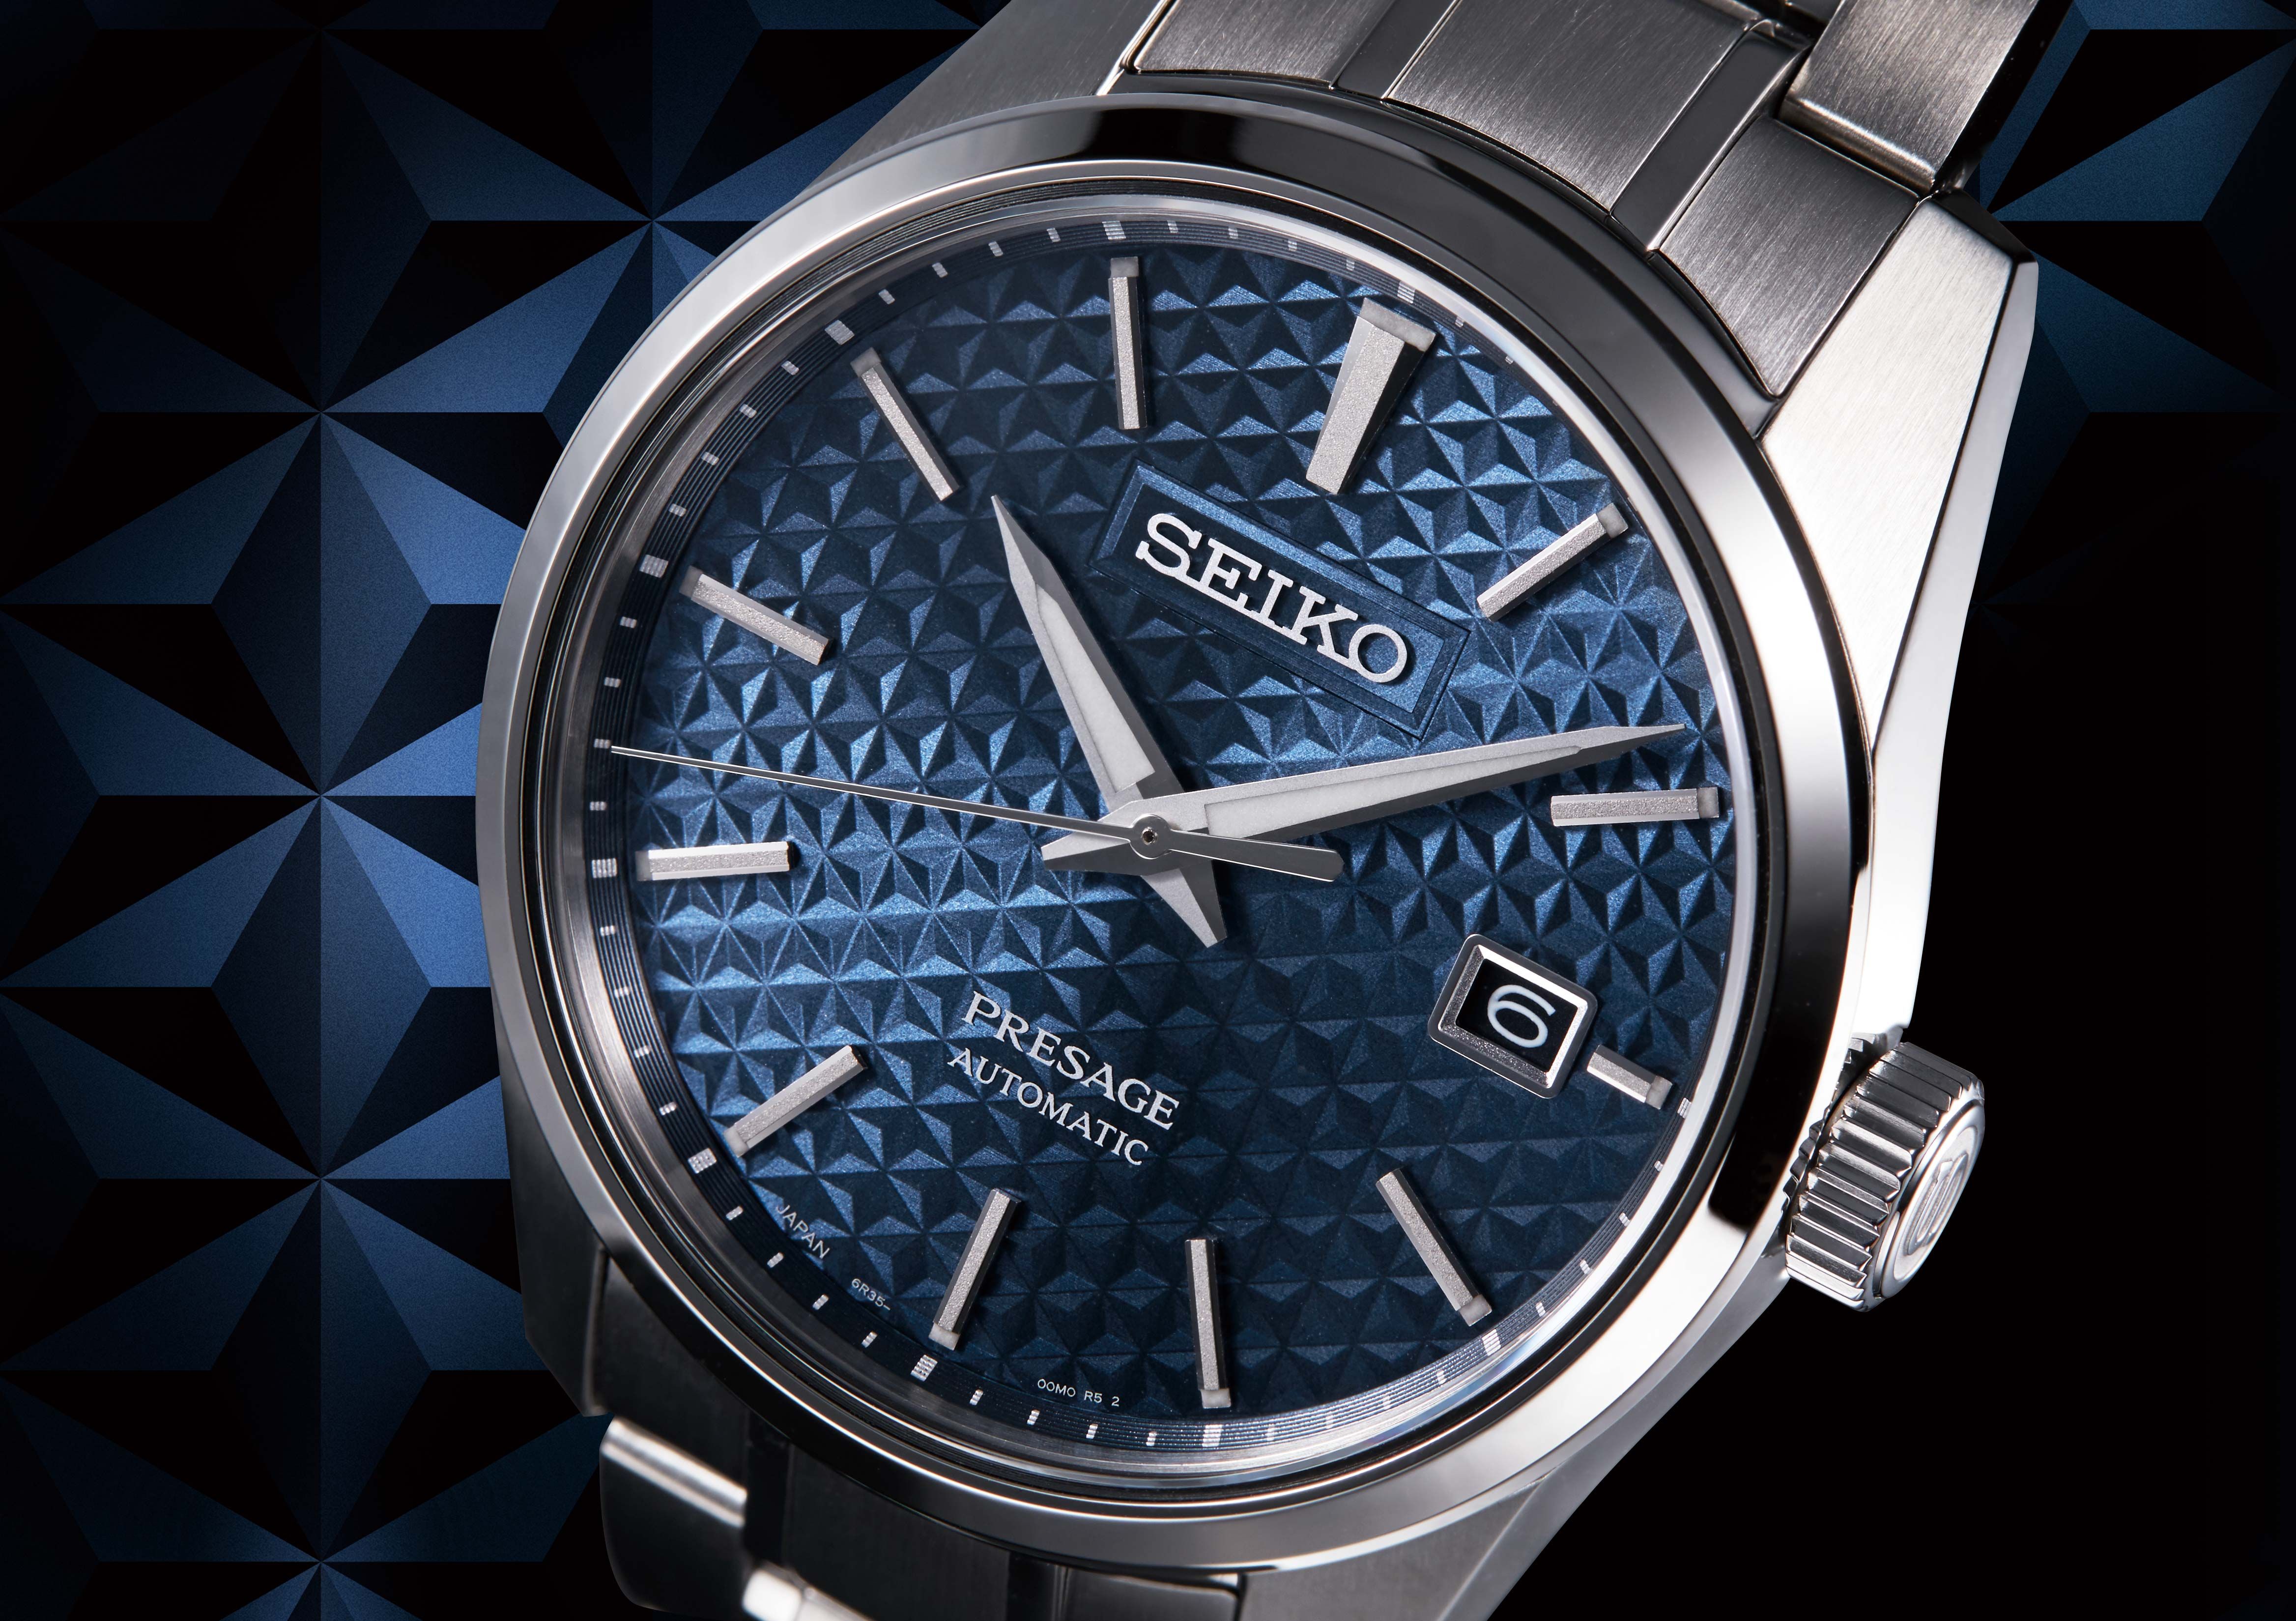 This Seiko Presage Has One of the Year's Coolest Dials